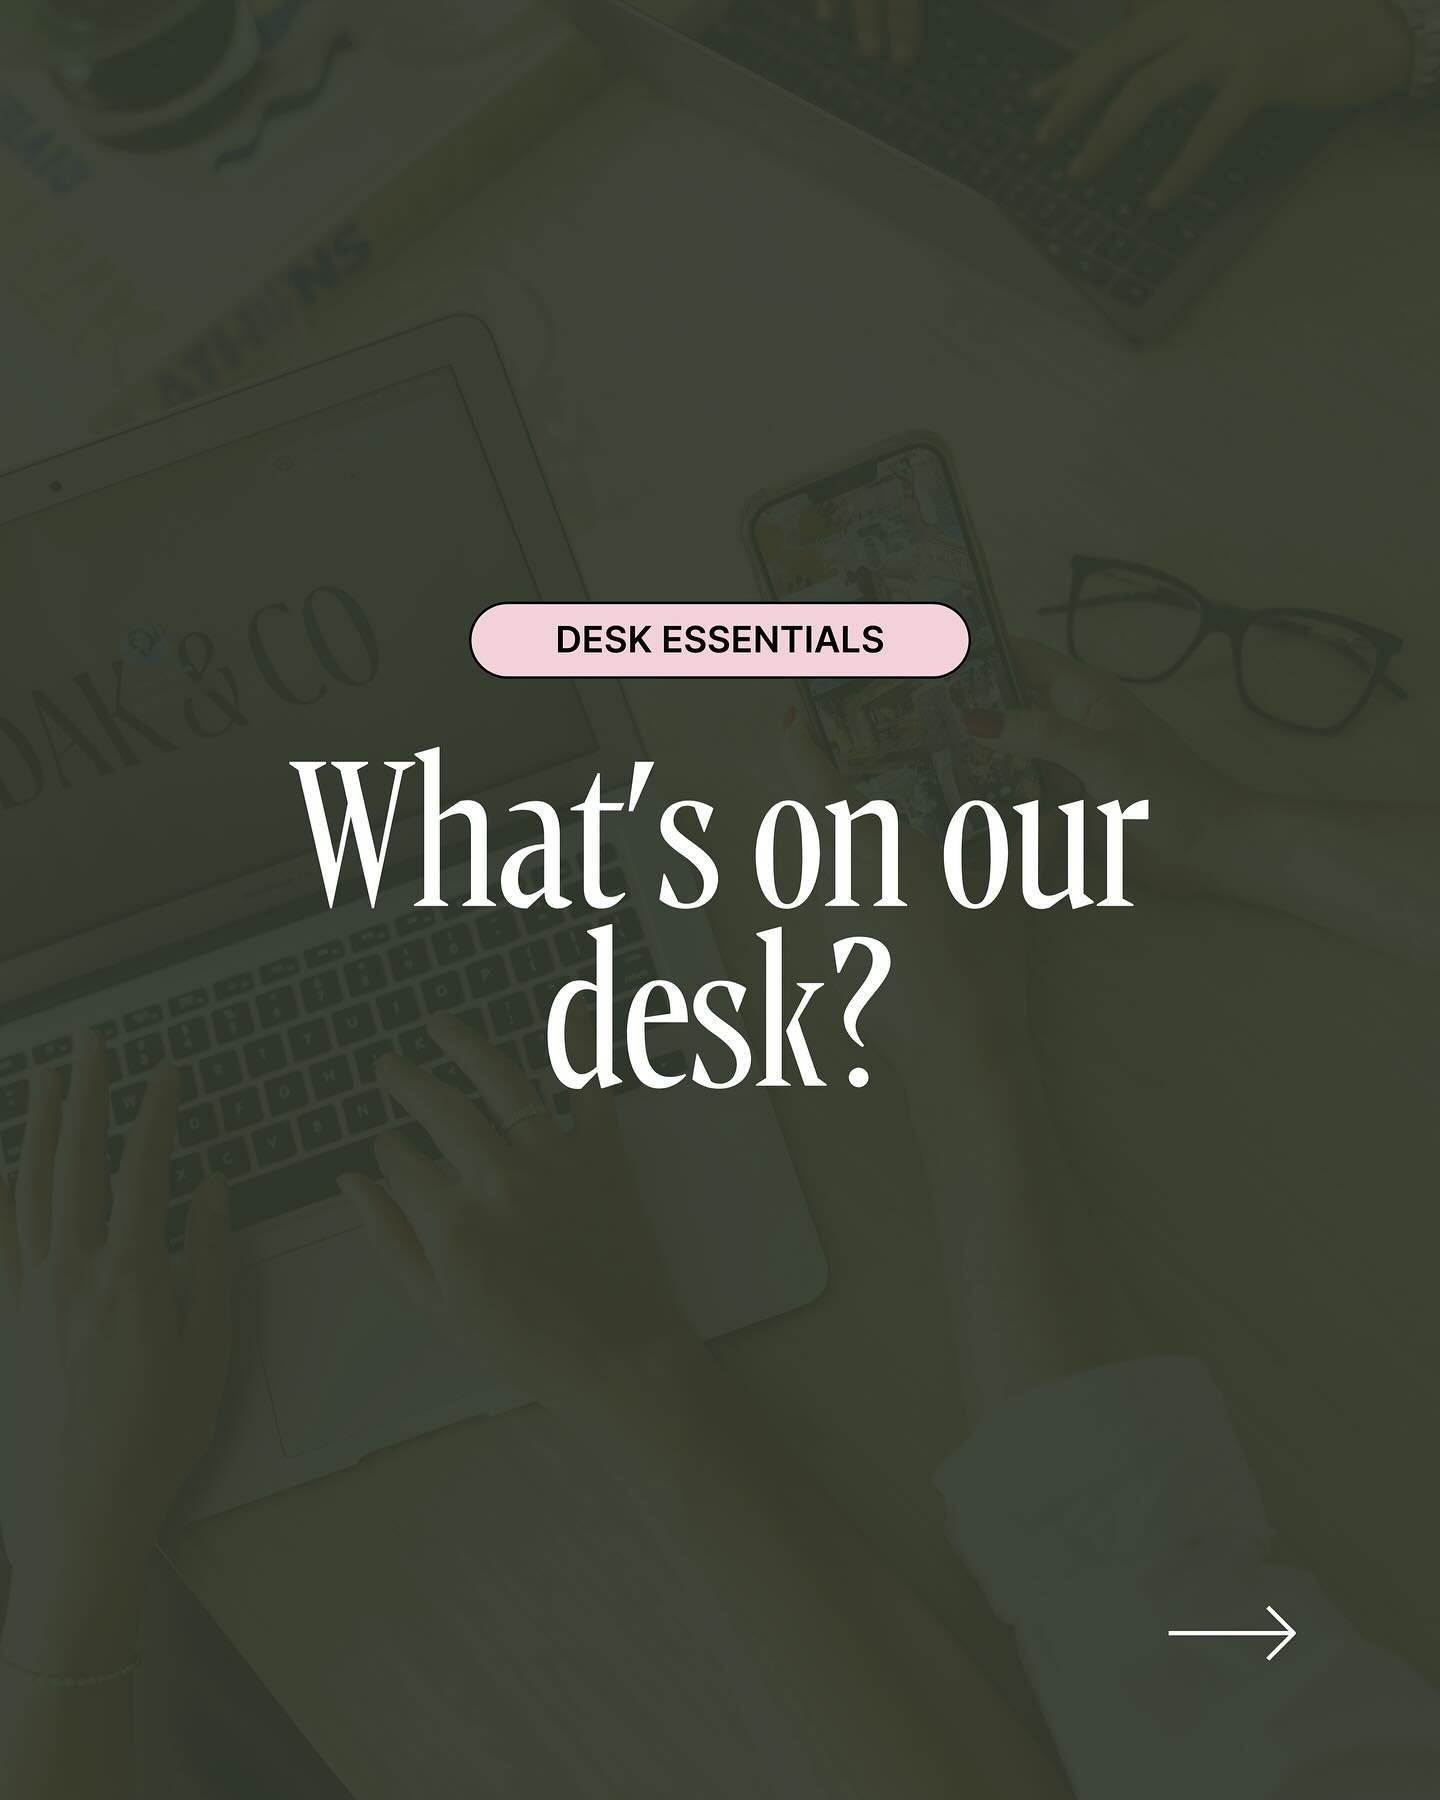 Take a peep at the D&amp;C team&rsquo;s desk essentials. 👀